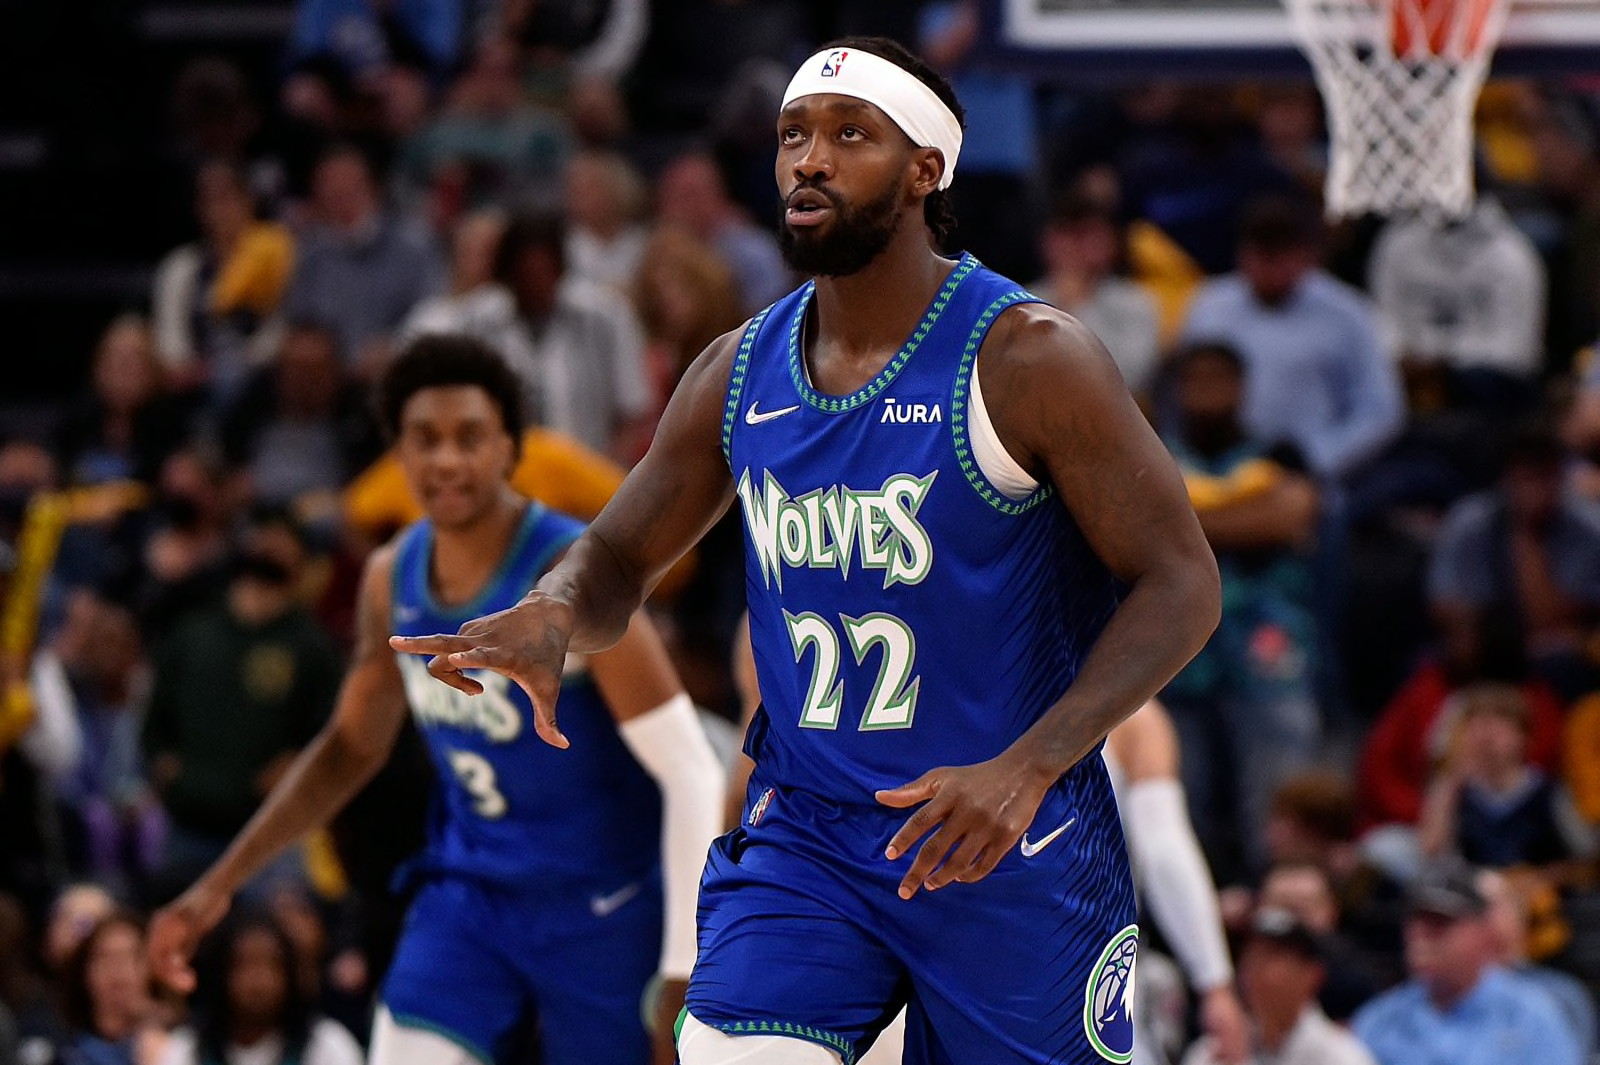 Best jersey in Wolves history : r/timberwolves